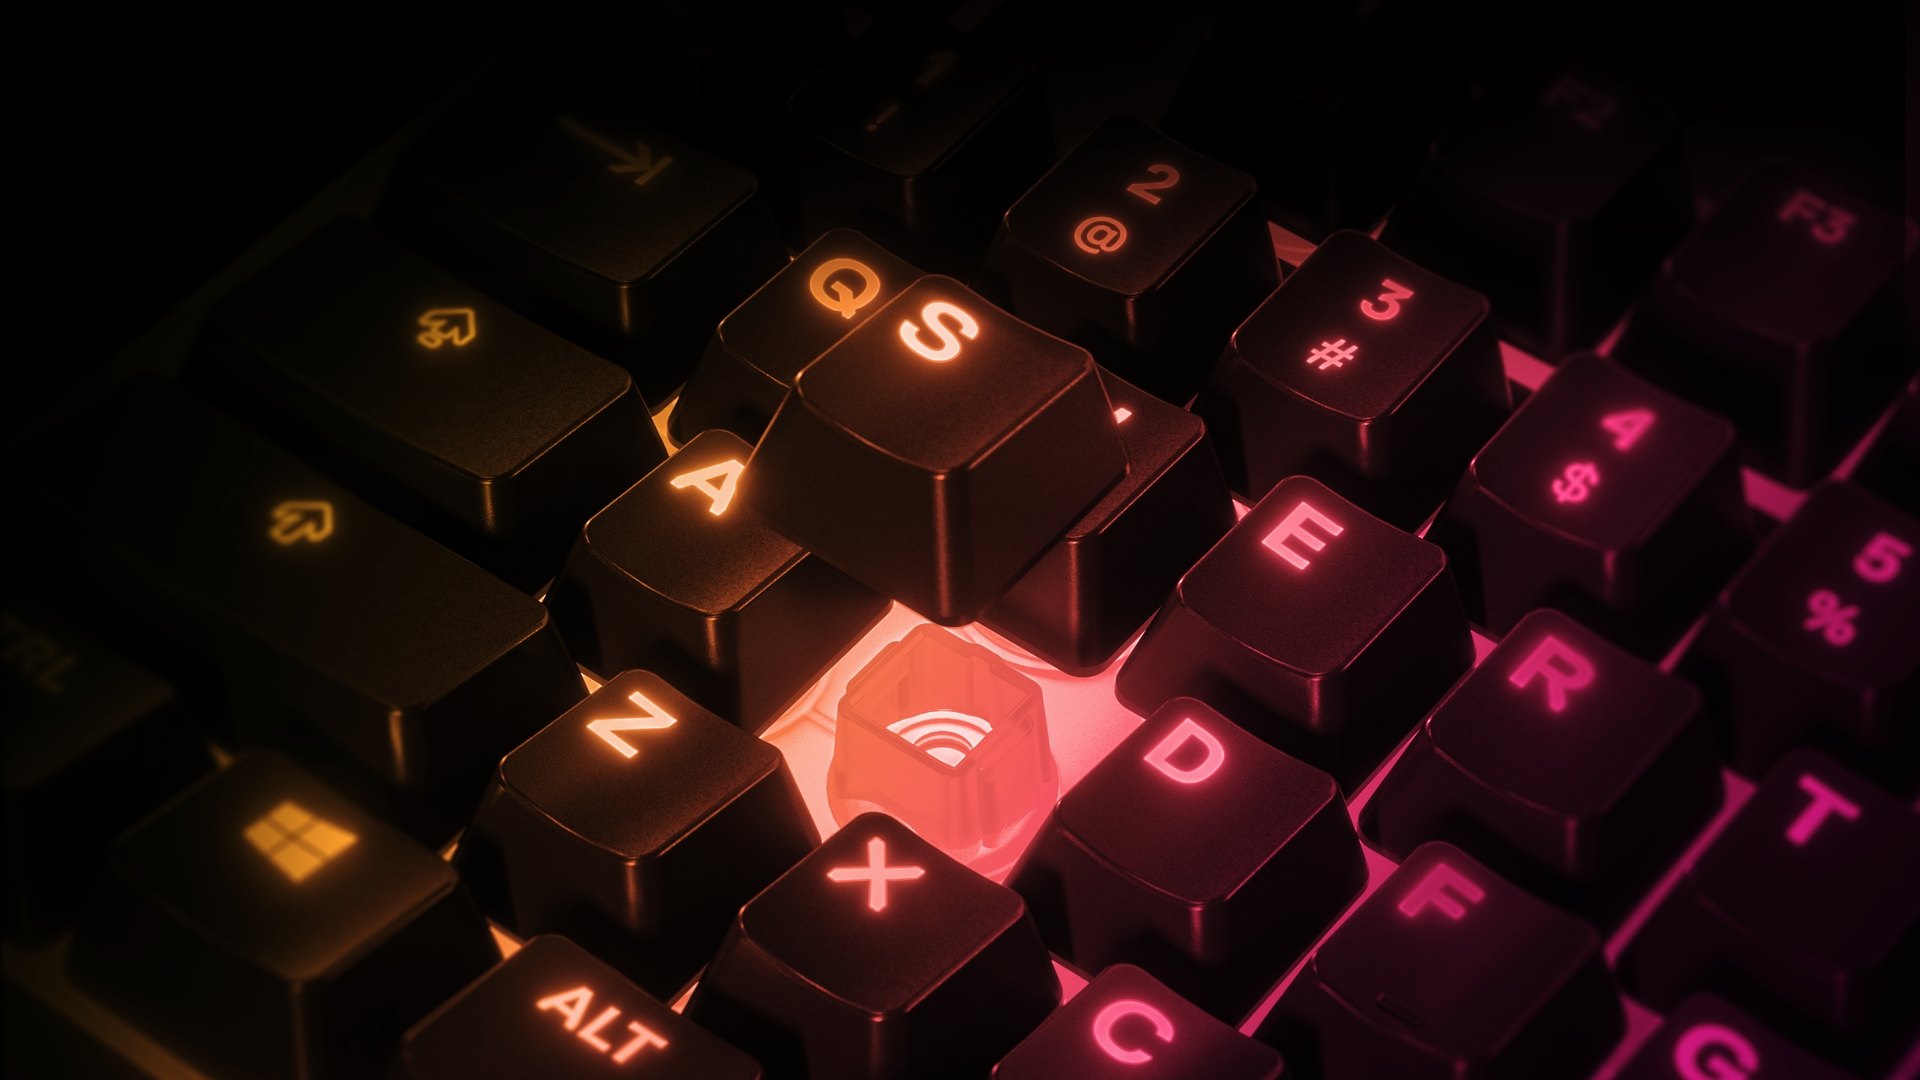 The S key is floating above the Apex 3 TKL keyboard to show off the whisper quiet membrane switches.